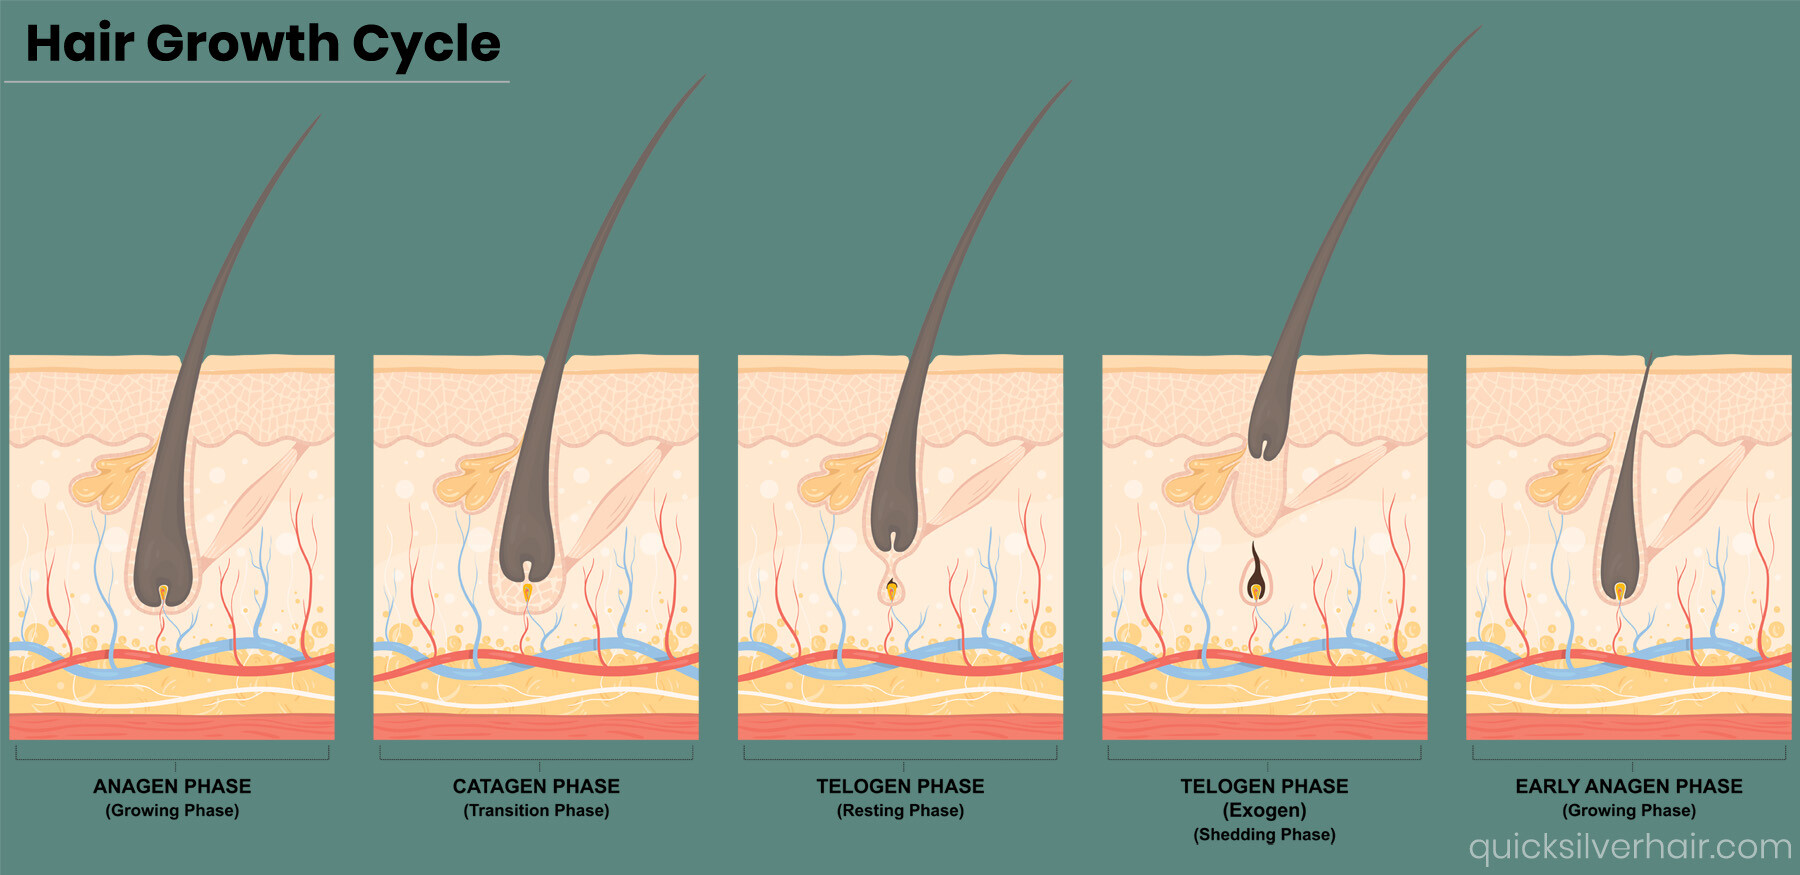 The Ultimate Guide to Hair Growth and Hair Loss